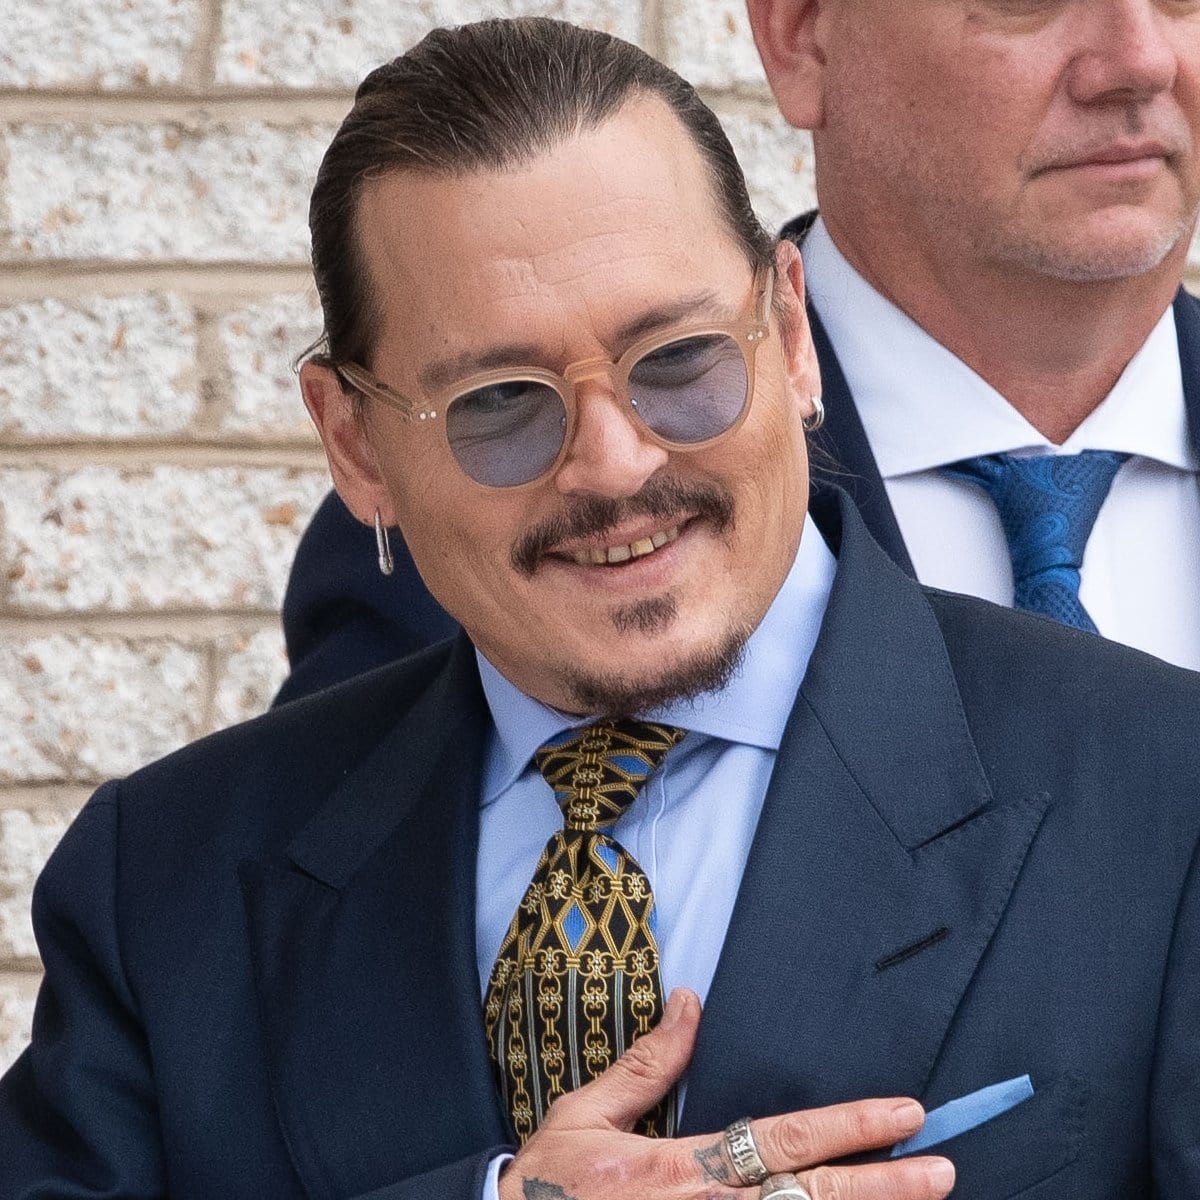 There has been much speculation about Johnny Depp's smile and teeth